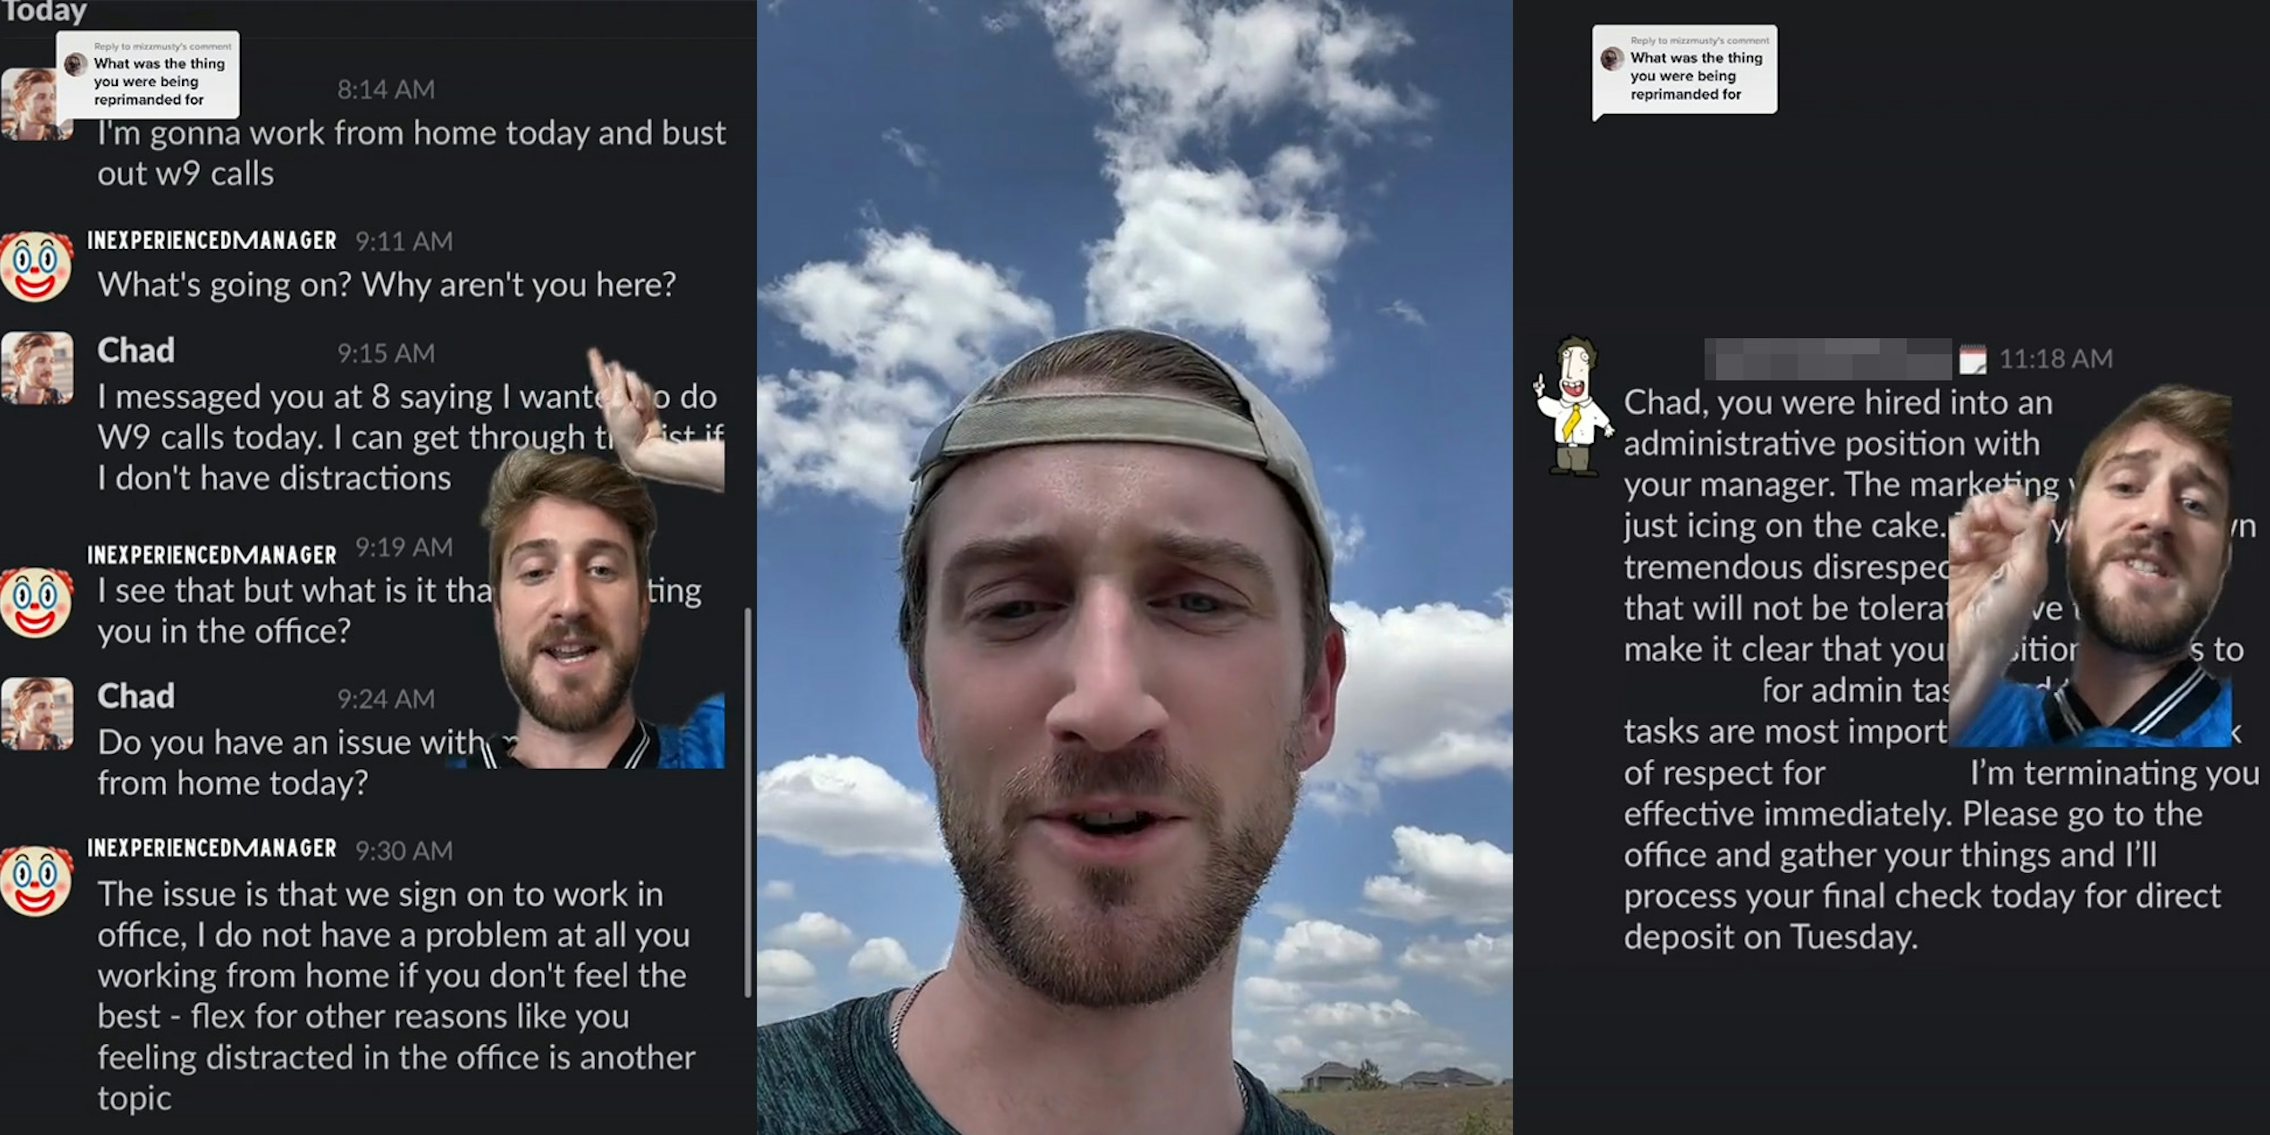 Slack messages with man greenscreen TikTok pointing caption 'I'm gonna work from home today and bust out w9 calls' 'What's going on? Why aren't you here? I messaged you at 8 saying I wanted to do w9 calls today. I can get through... 'I see that but what is it that... you in office? ' Do you have an issue with... from home today?' 'The issue is that we sign on to work in office. I do not have a problem at all you working from home if you don't feel like the best- flex for other reasons like you feeling distracted in office is another topic' (l) man speaking outside (c) man greenscreen TikTok over Slack messages caption 'Chad, you were hired into an administrative position with your manager. The marketing... just icing on the cake.. tremendous disrespect... that will not be tolerated.. make it clear that your situation... for admin... Tasks are most important... of respect for (blank) I'm terminating you effective immediately. Please go to the office and gather your things and I'll process your final check today for direct deposit on Tuesday' (r)